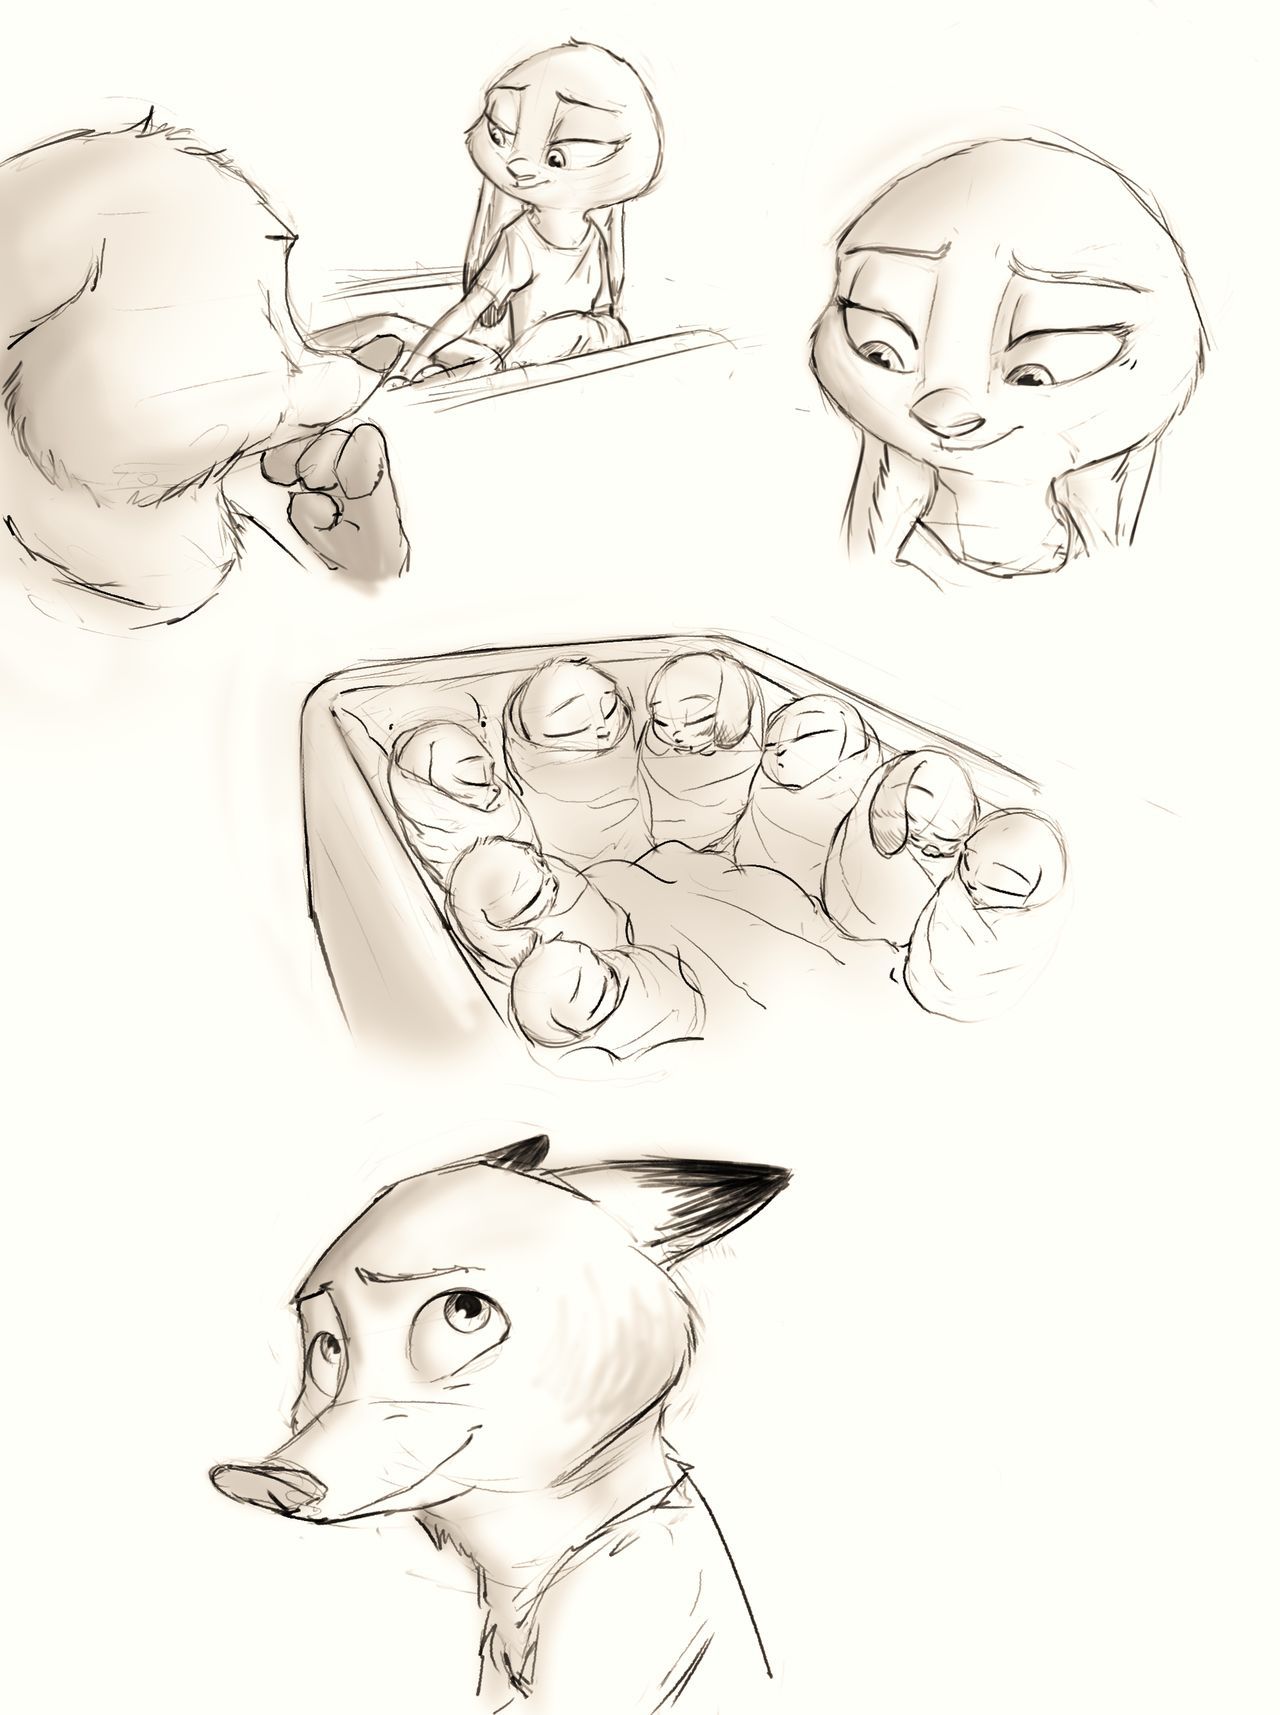 [Sprinkah] This is what true love looks like (Zootopia) (Spanish) (On Going) [Landsec] http://sprinkah.tumblr.com/ 41